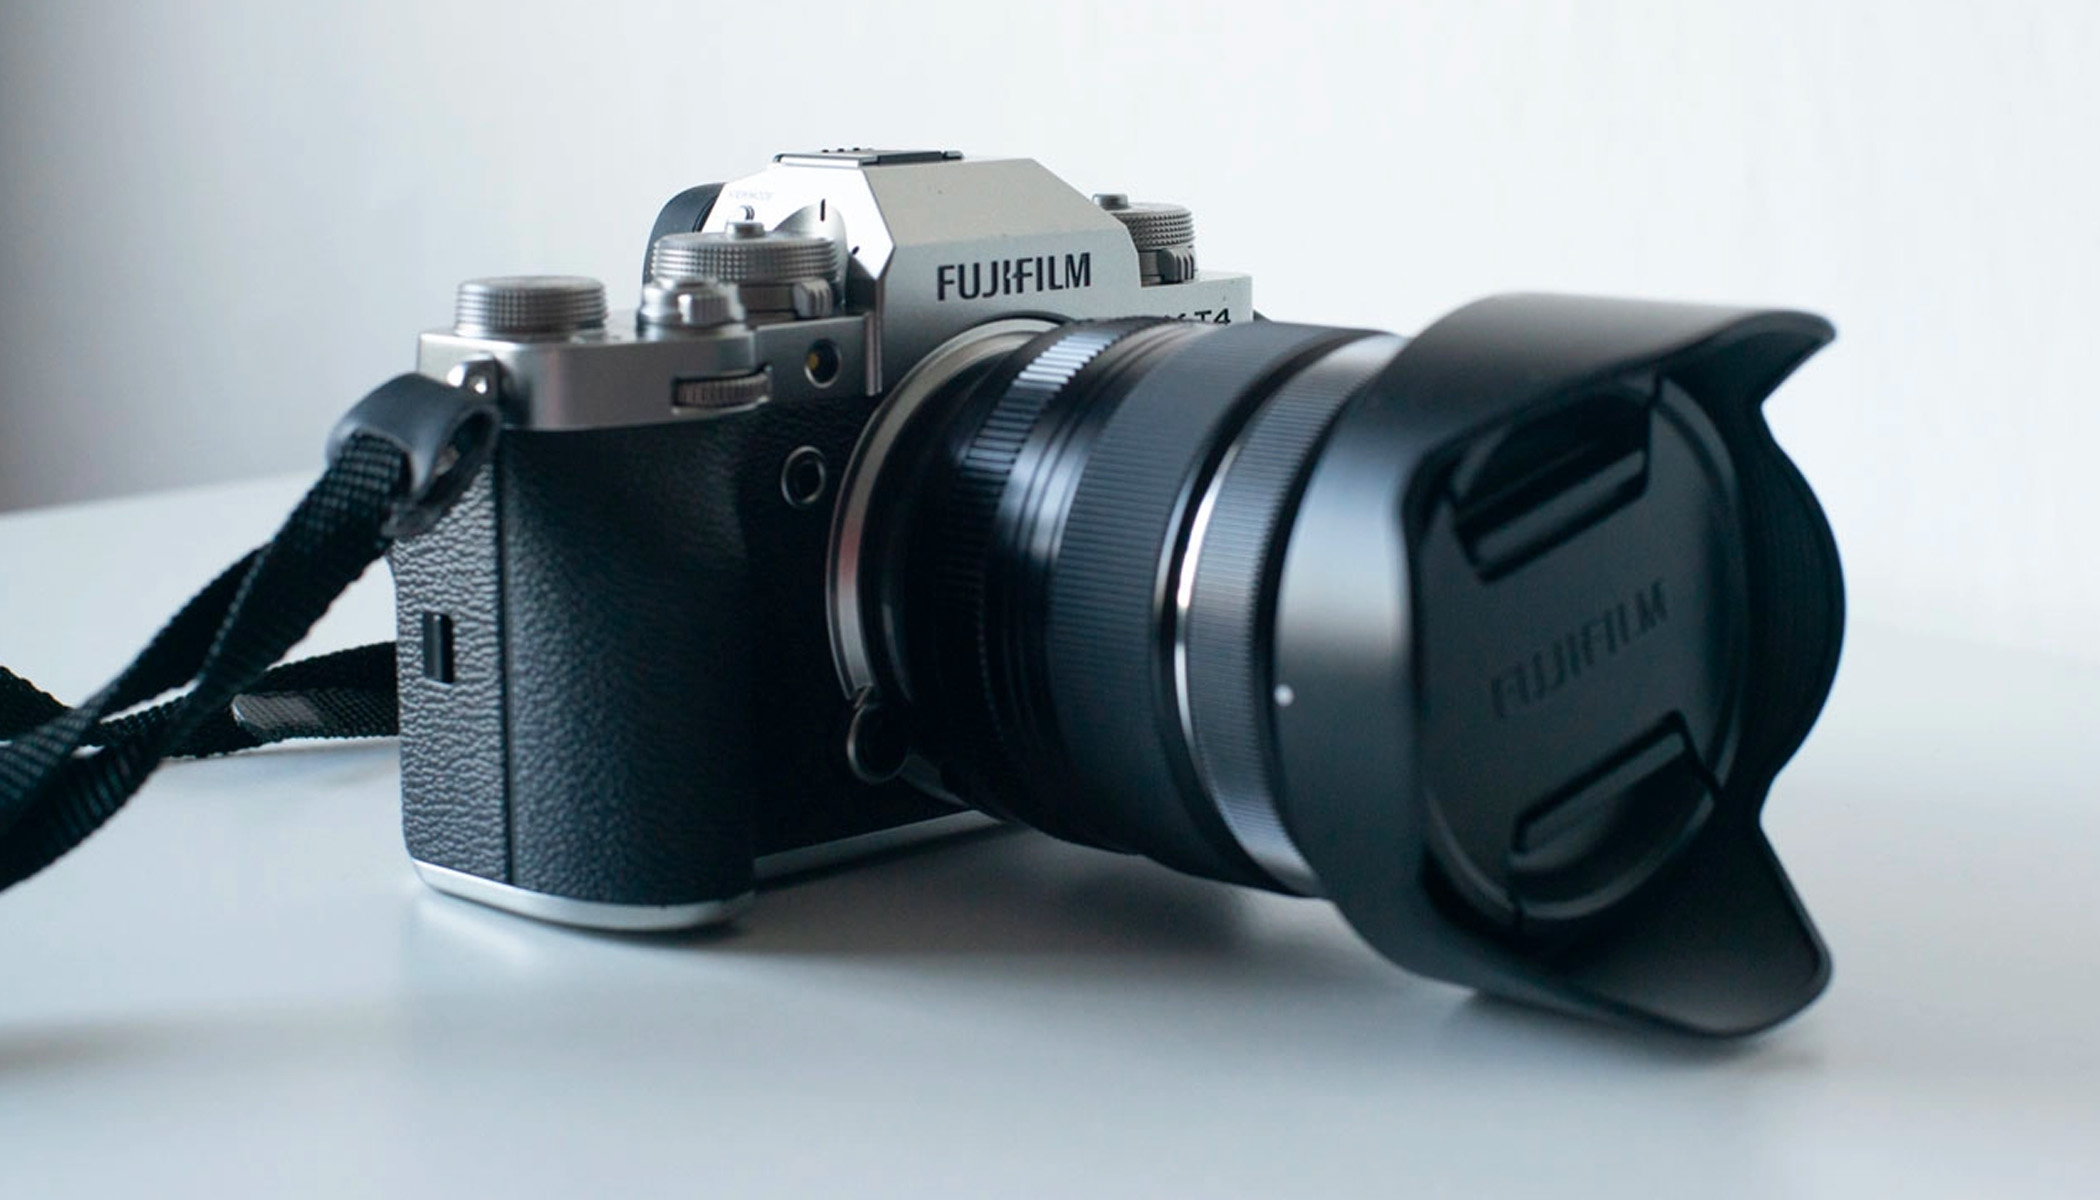 A side view of the Fujifilm X-T4, with a capped lens, resting on a white surface.